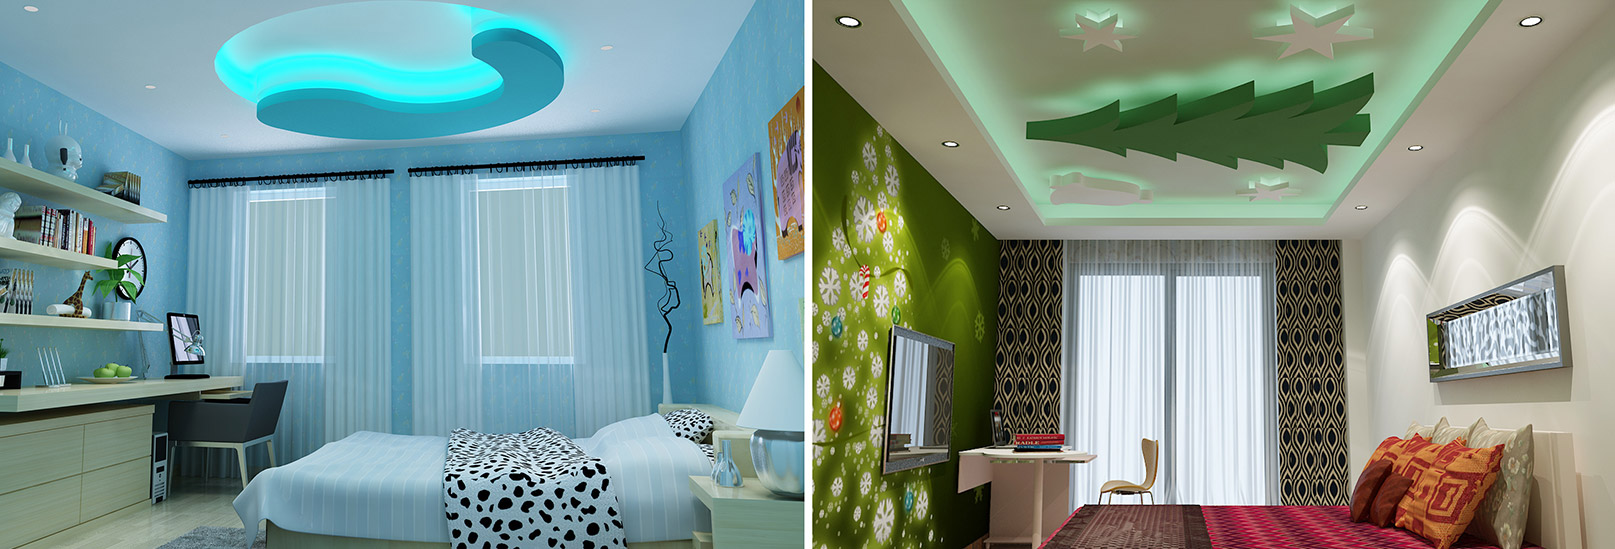 Gypsum or PoP - The best ceiling for your spaces